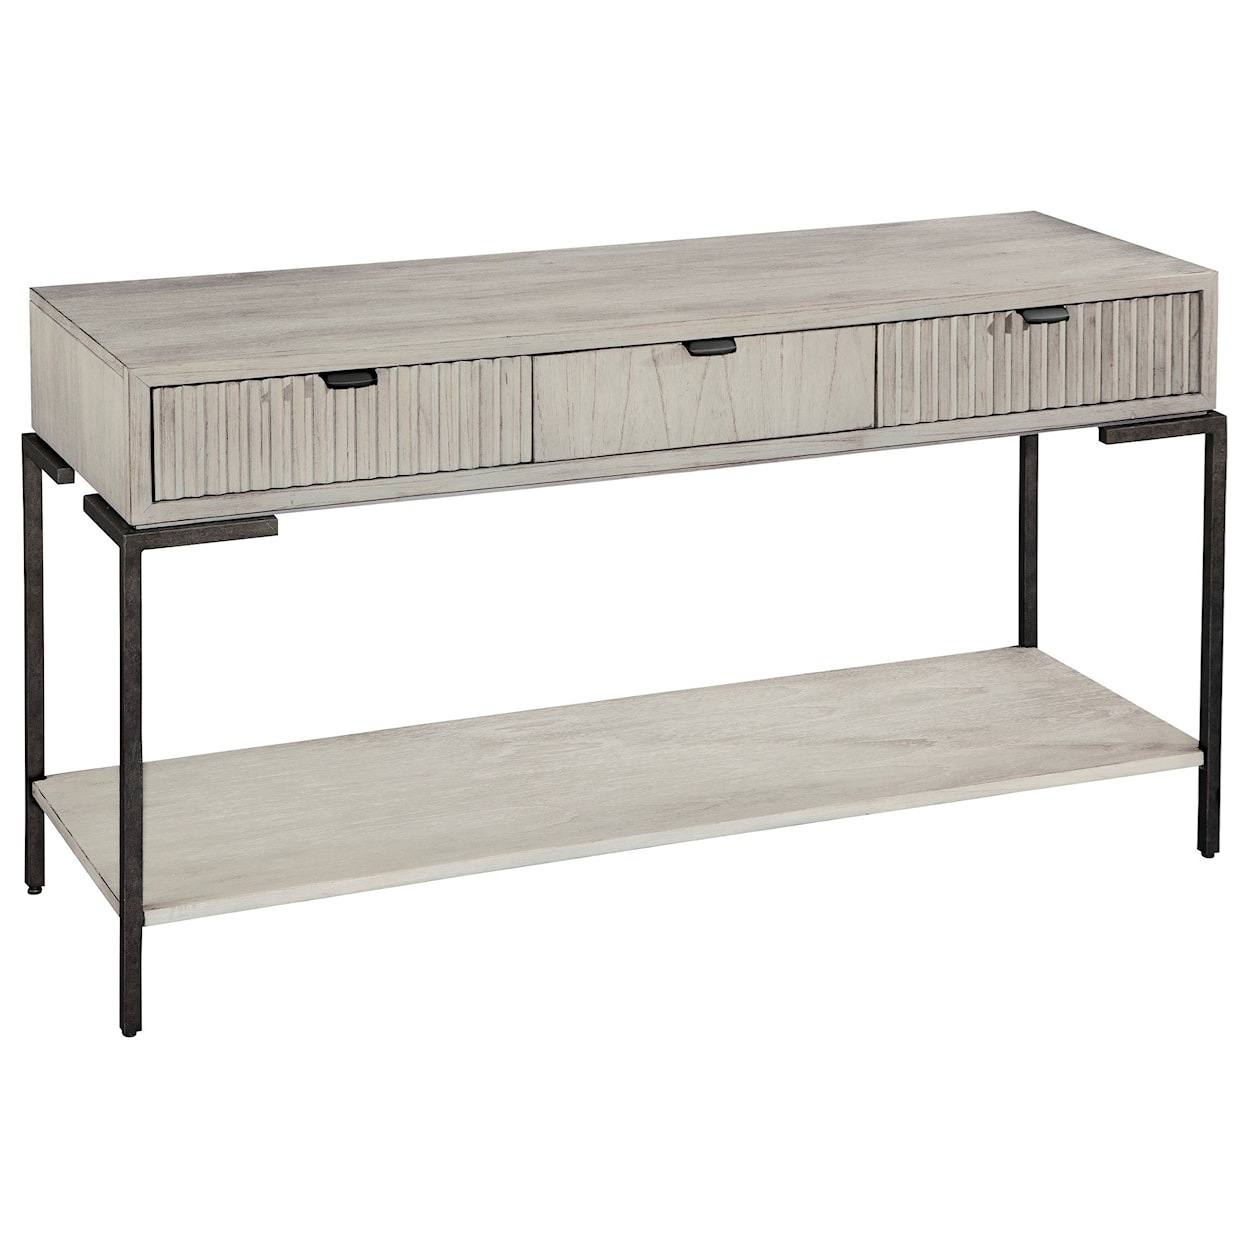 Hekman Sierra Heights Sofa Table with Drawers